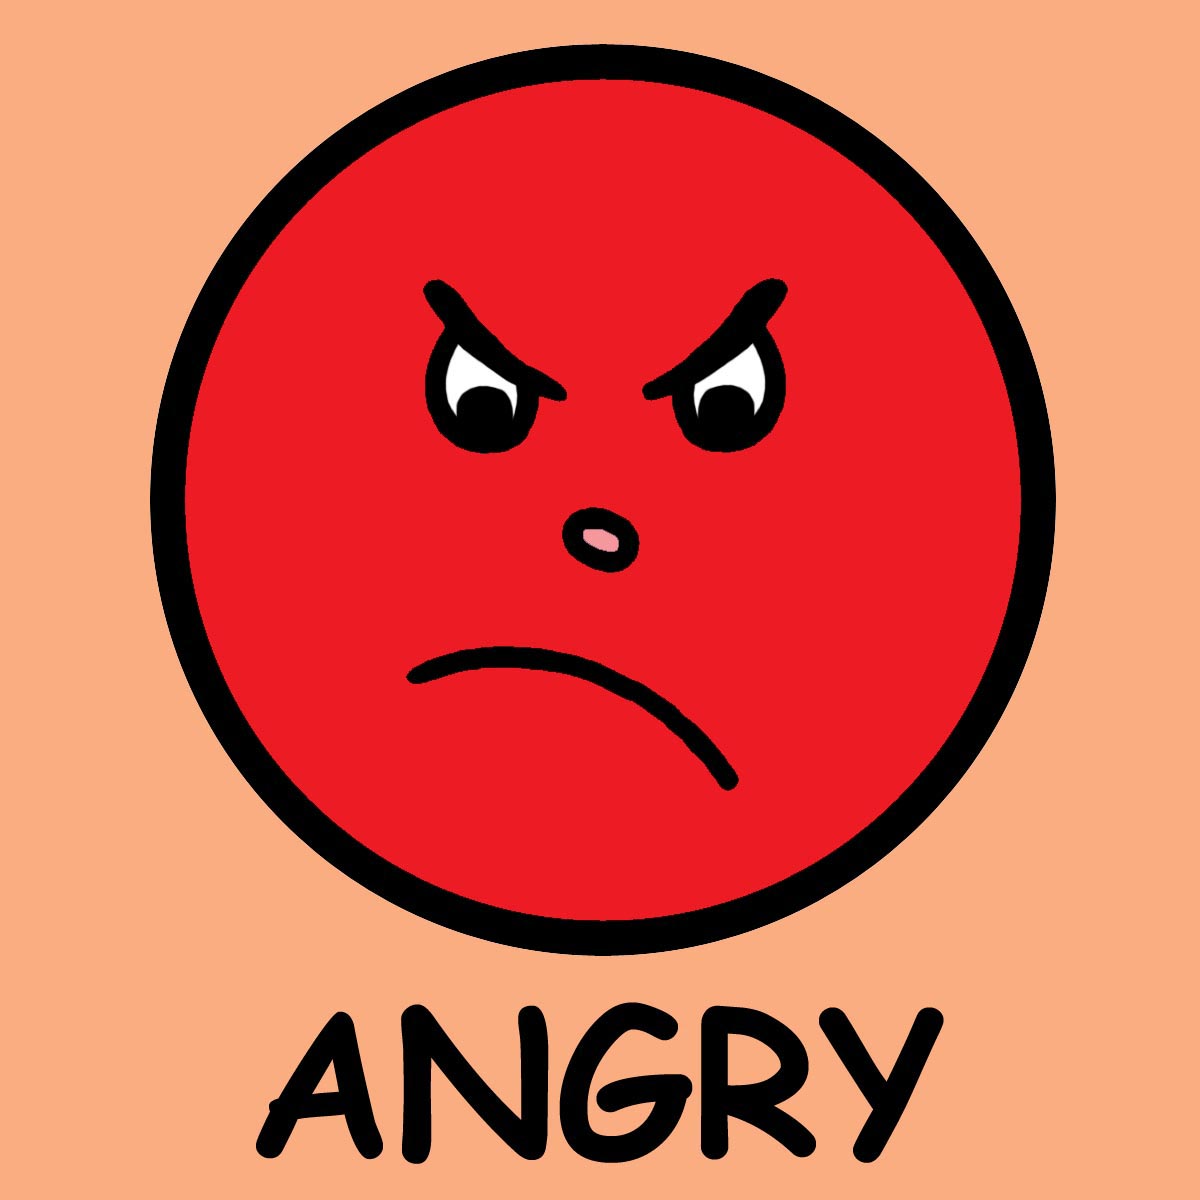 Really Angry Face Emoticon - ClipArt Best - ClipArt Best